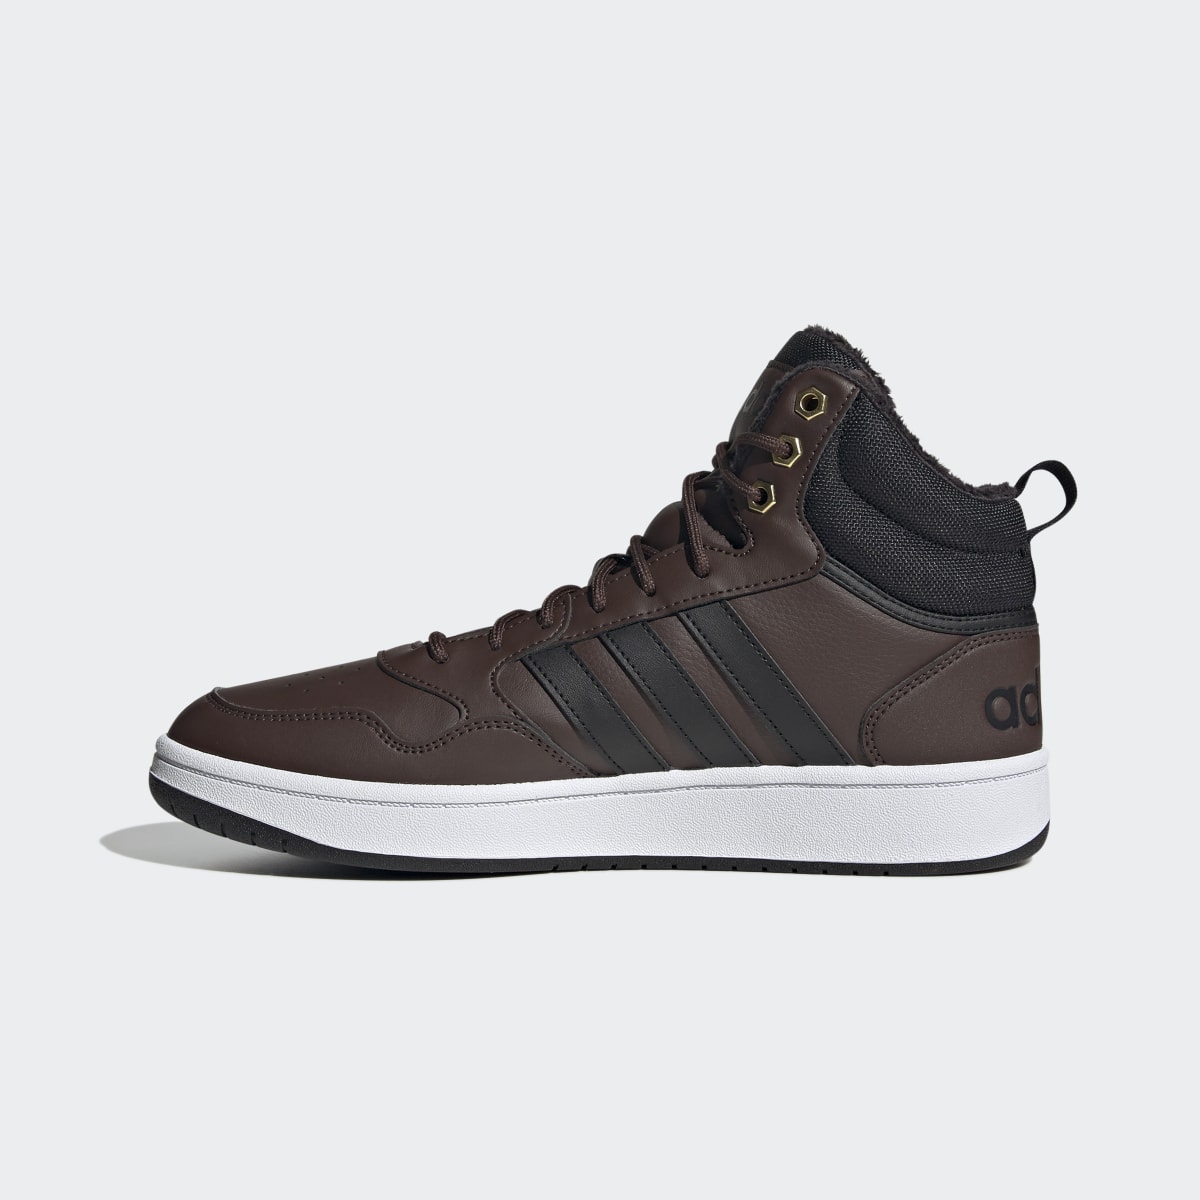 Adidas Hoops 3.0 Mid Lifestyle Basketball Classic Fur Lining Winterized Schuh. 7